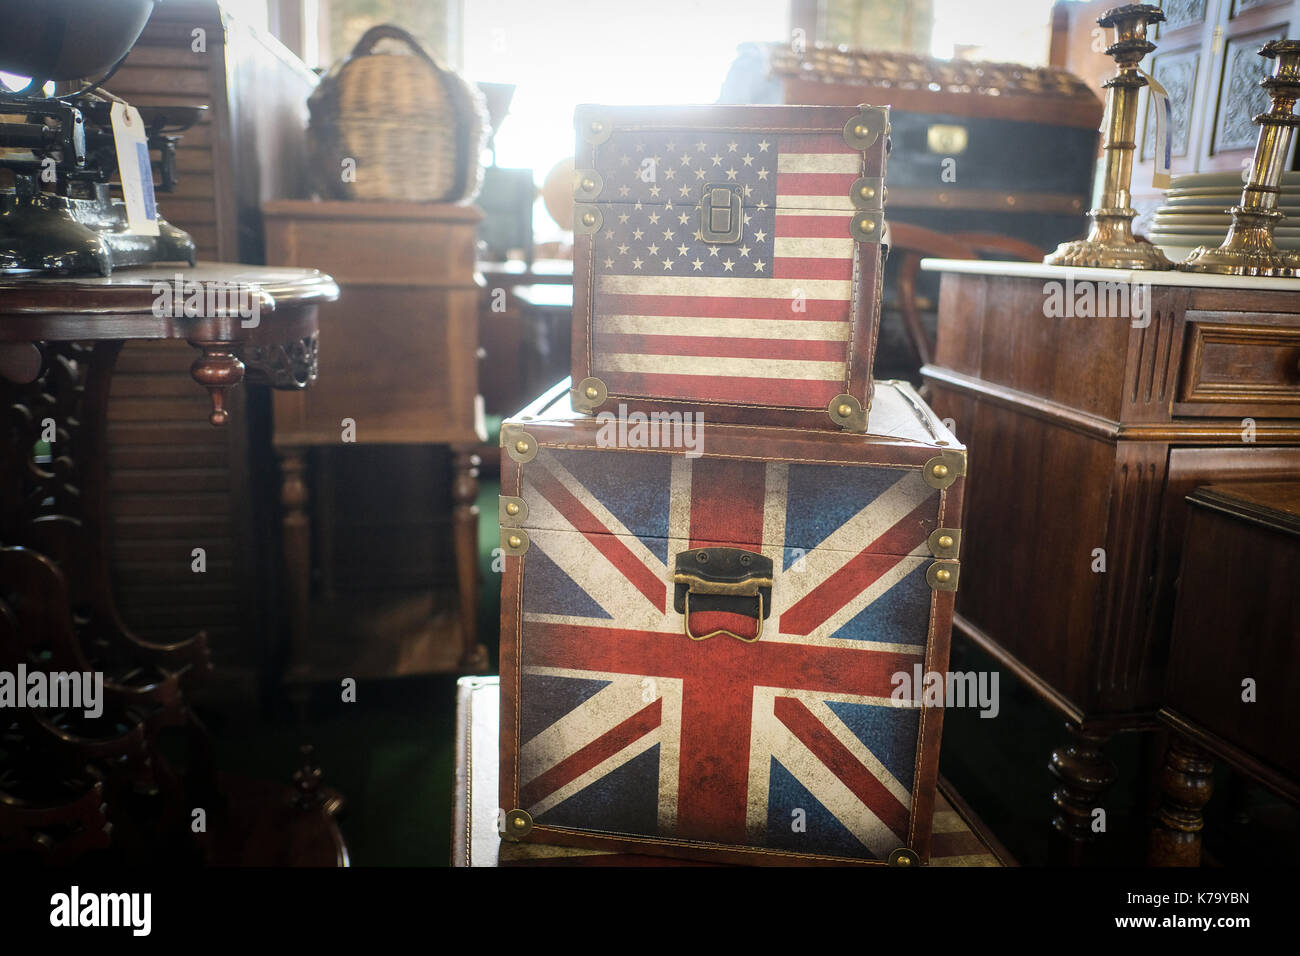 Antique boxes with Union Jack and Stars and Stripes flags Stock Photo